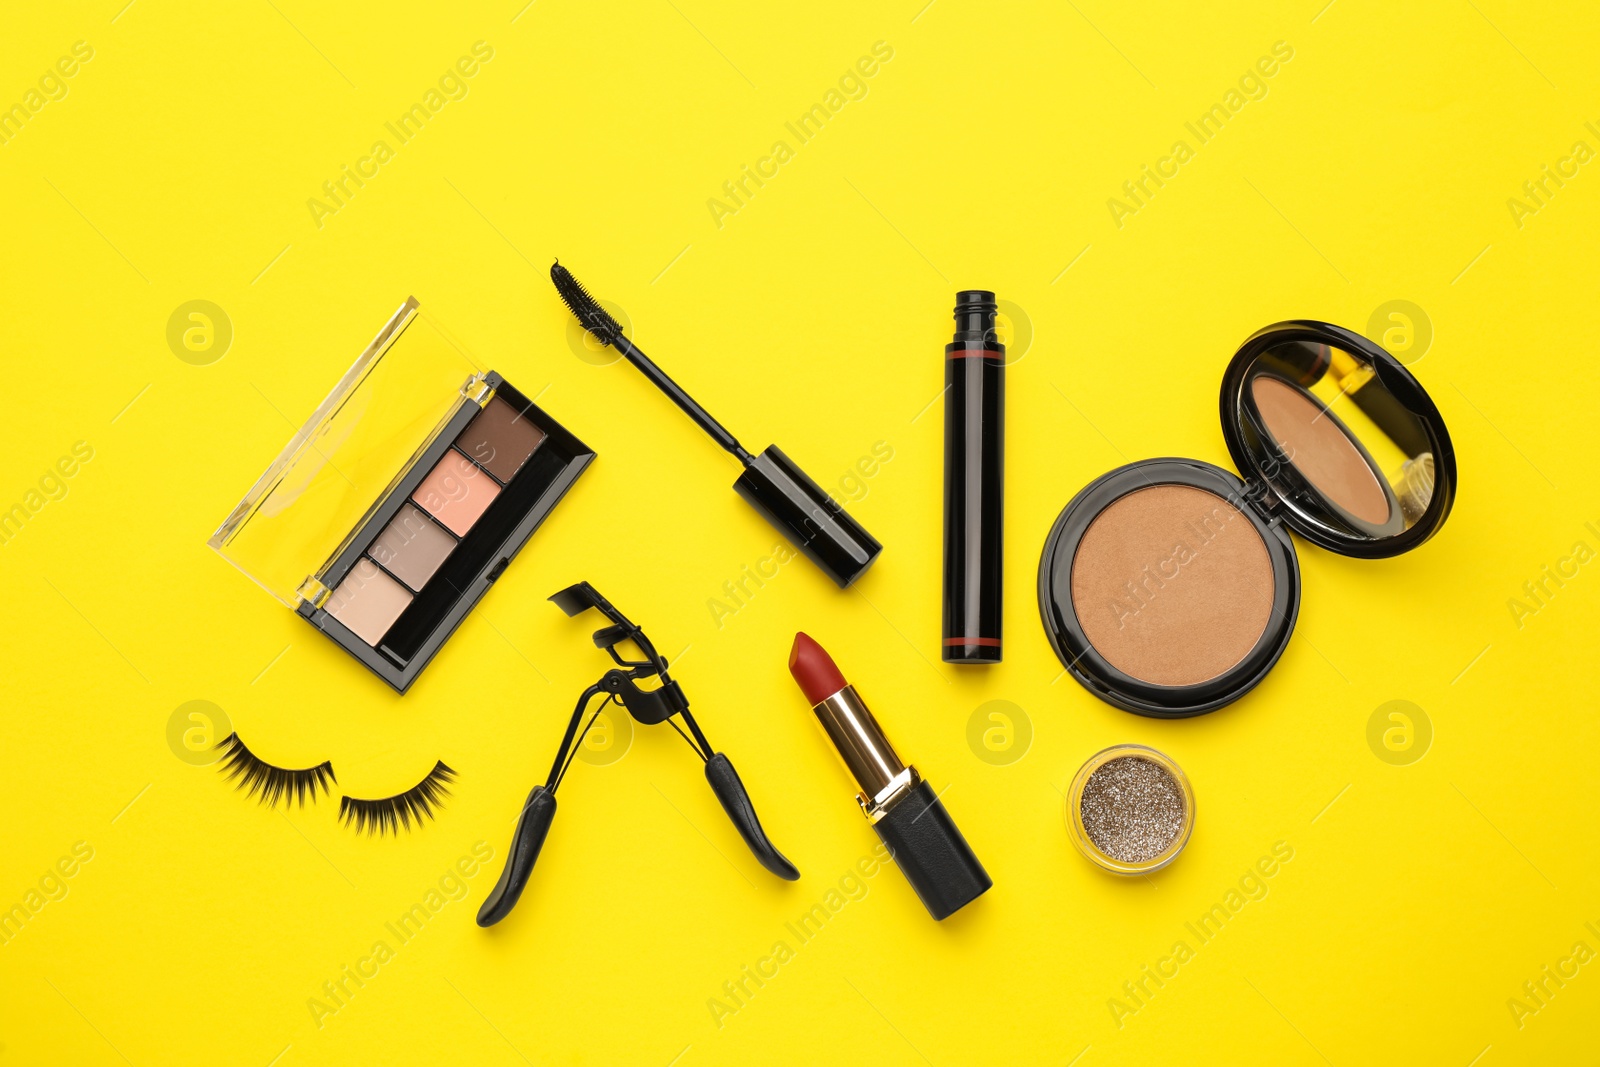 Photo of Eyelash curler and makeup products on yellow background, flat lay